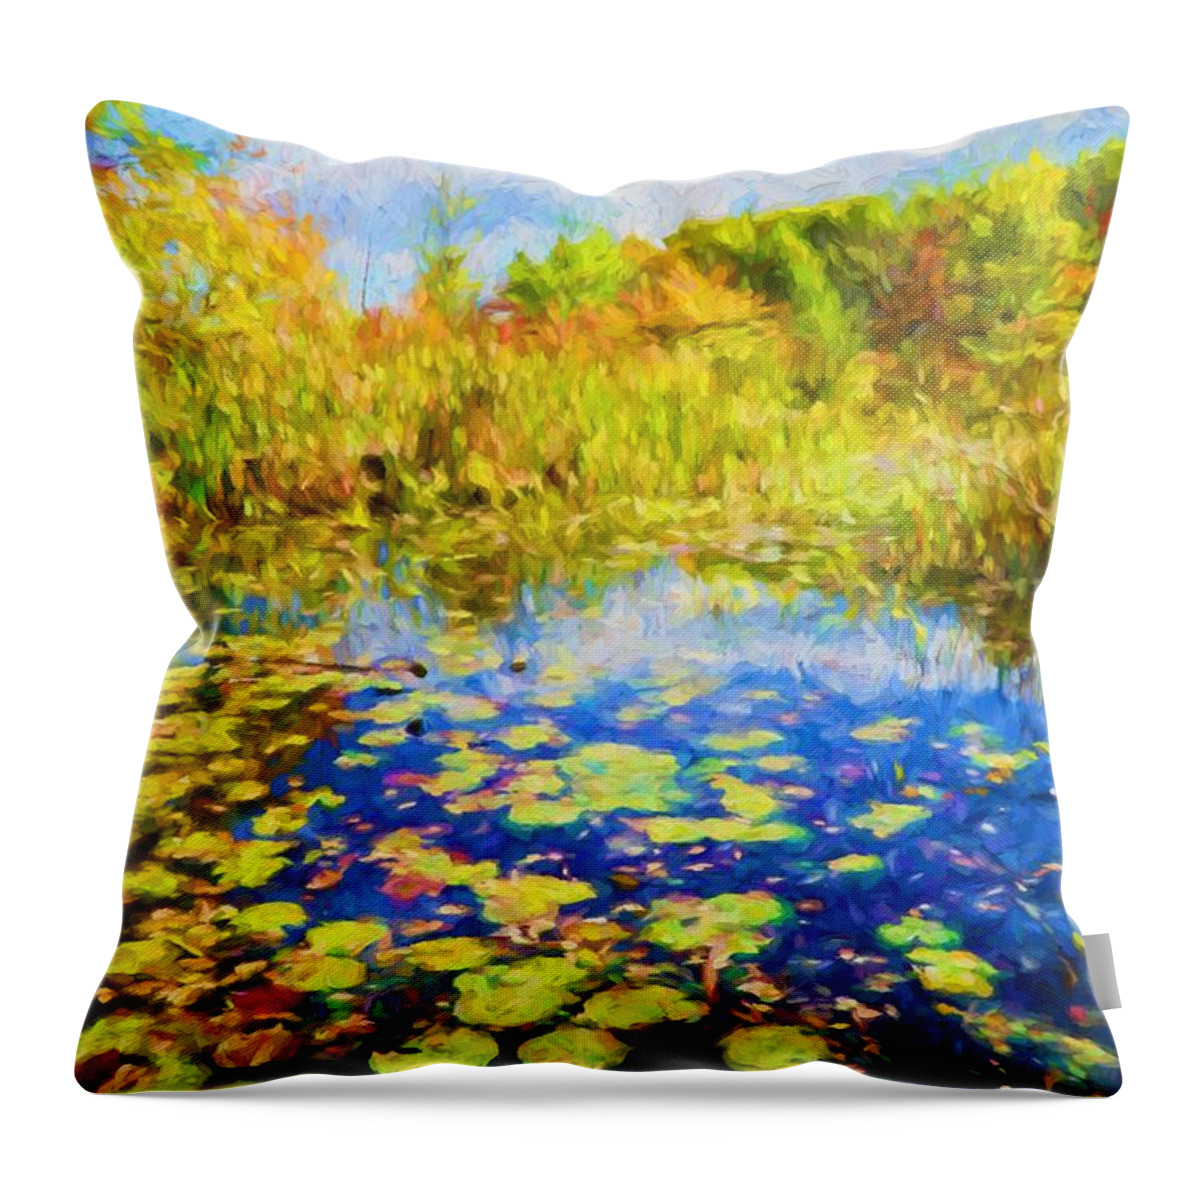 Autumn Throw Pillow featuring the painting Lily Pond by Lilia D